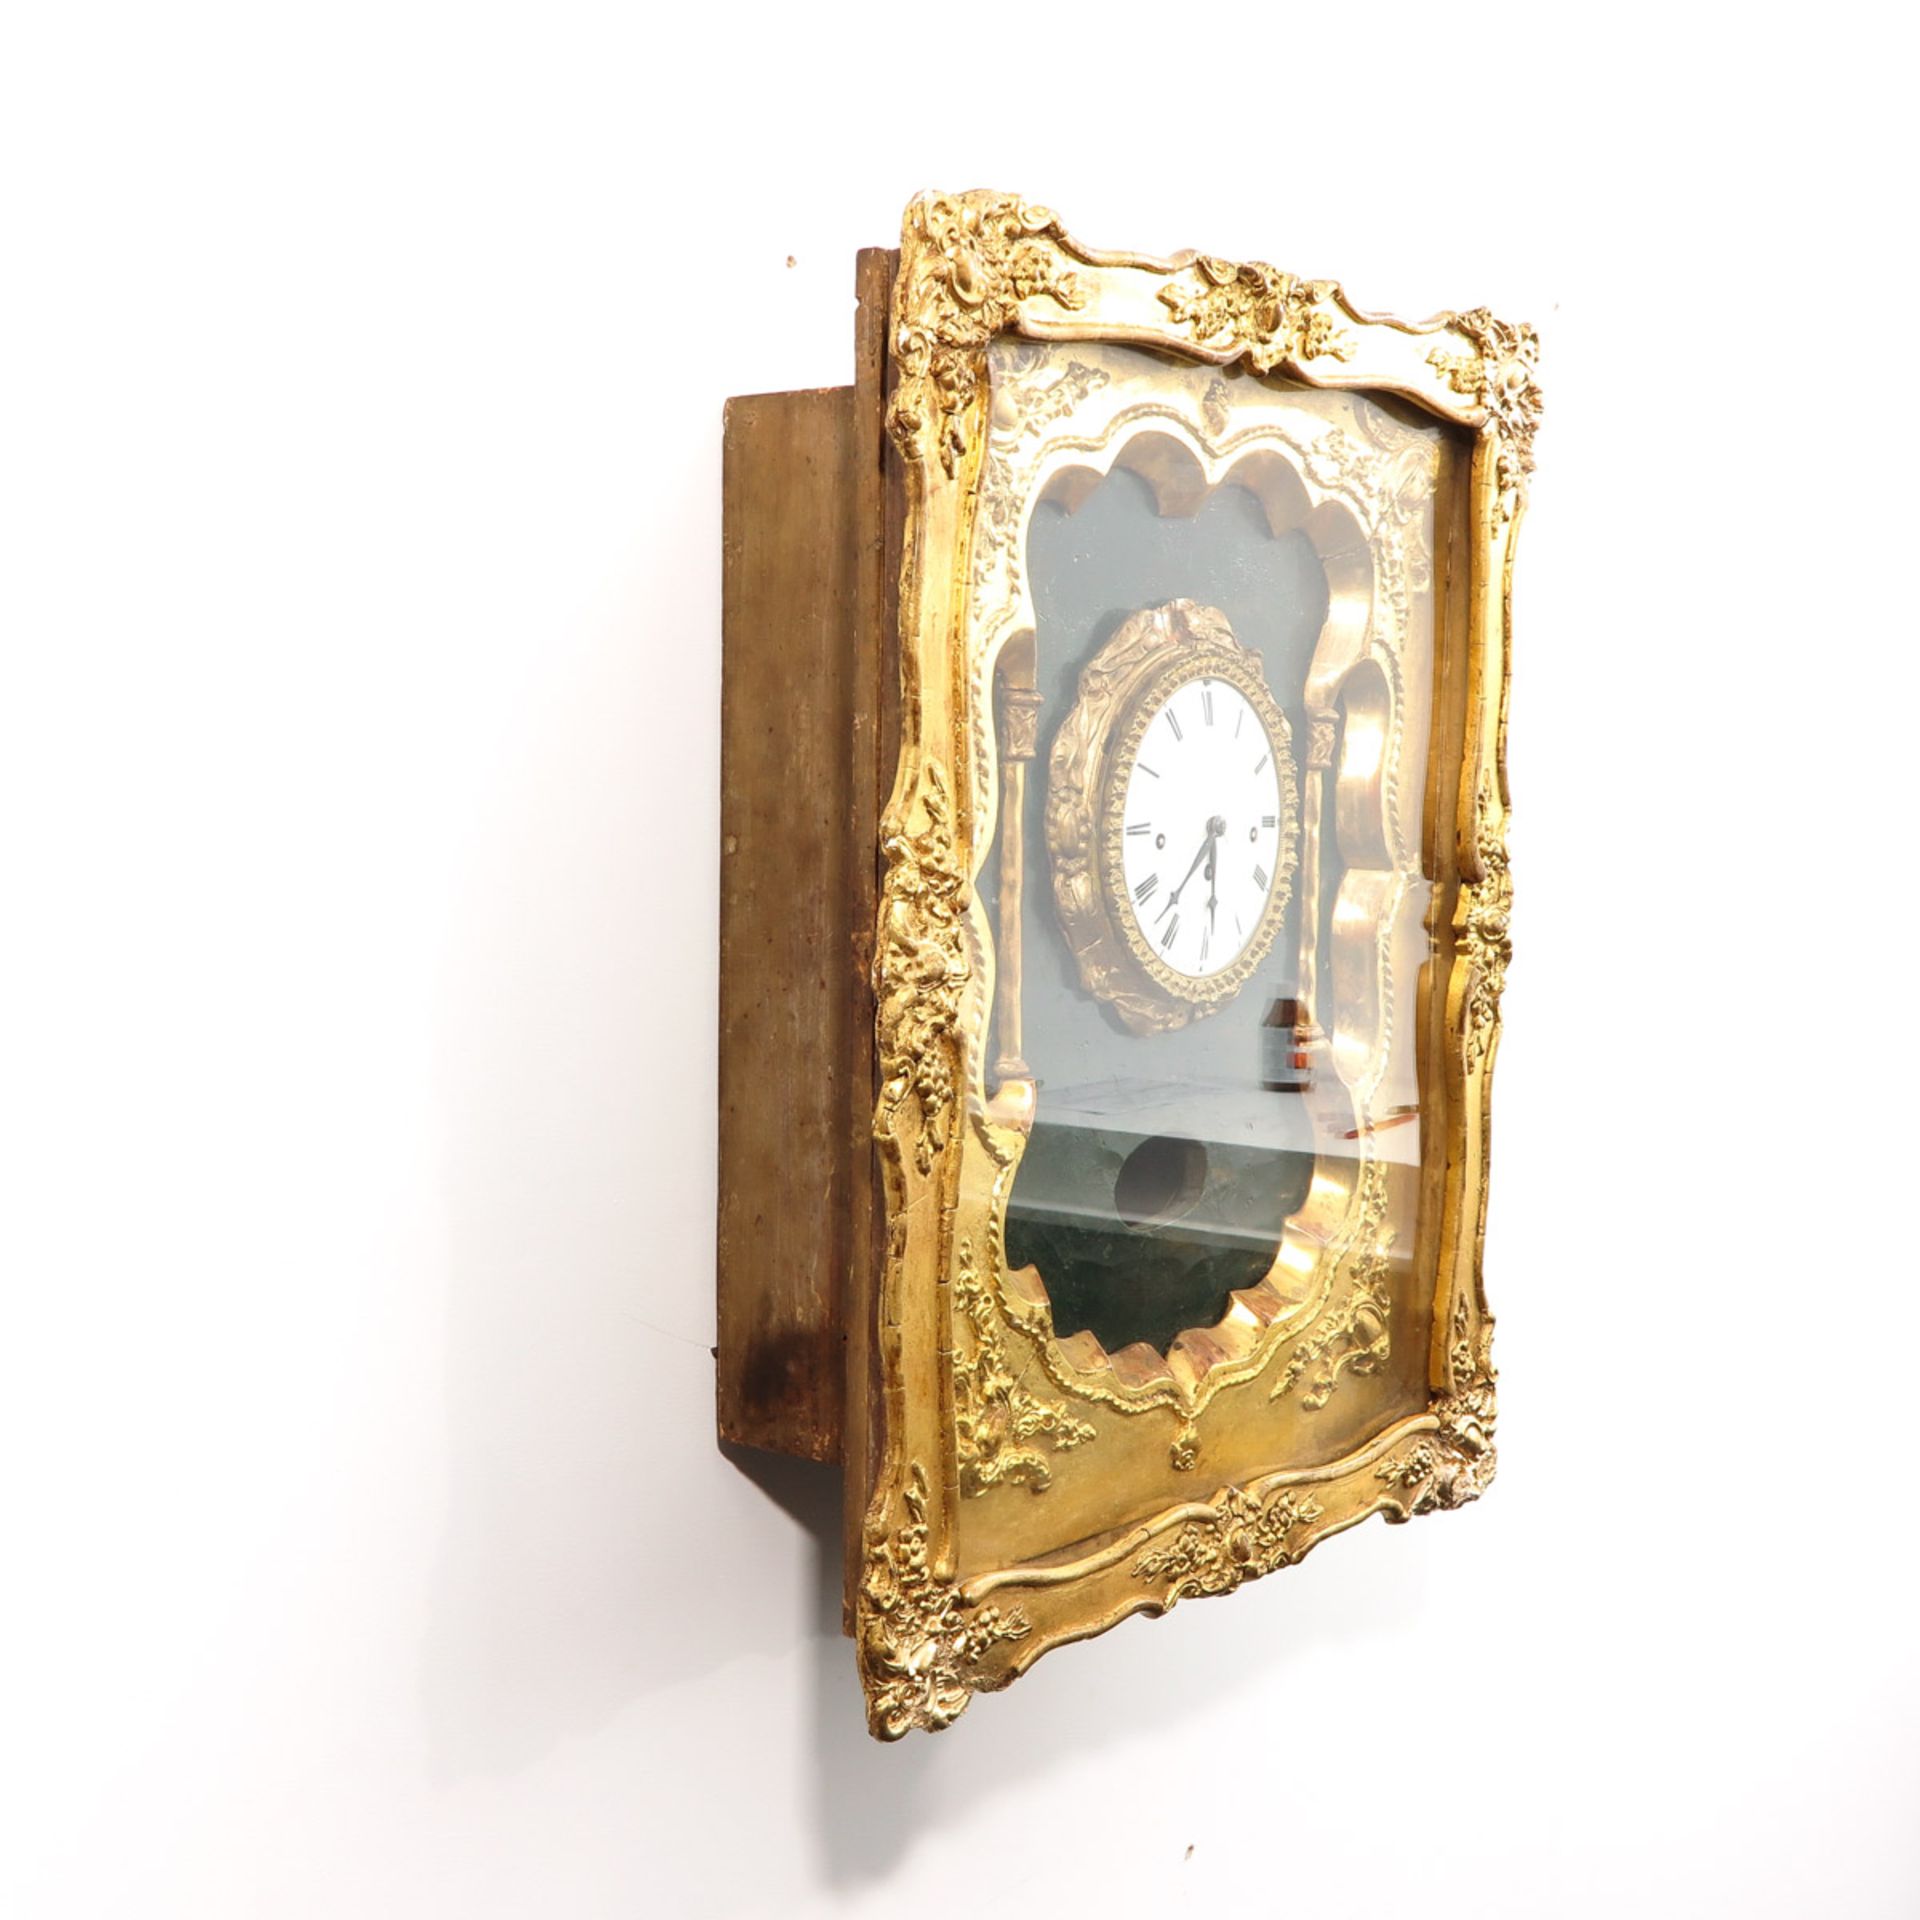 A 19th Century Viennese Musical Wall Clock - Image 2 of 10